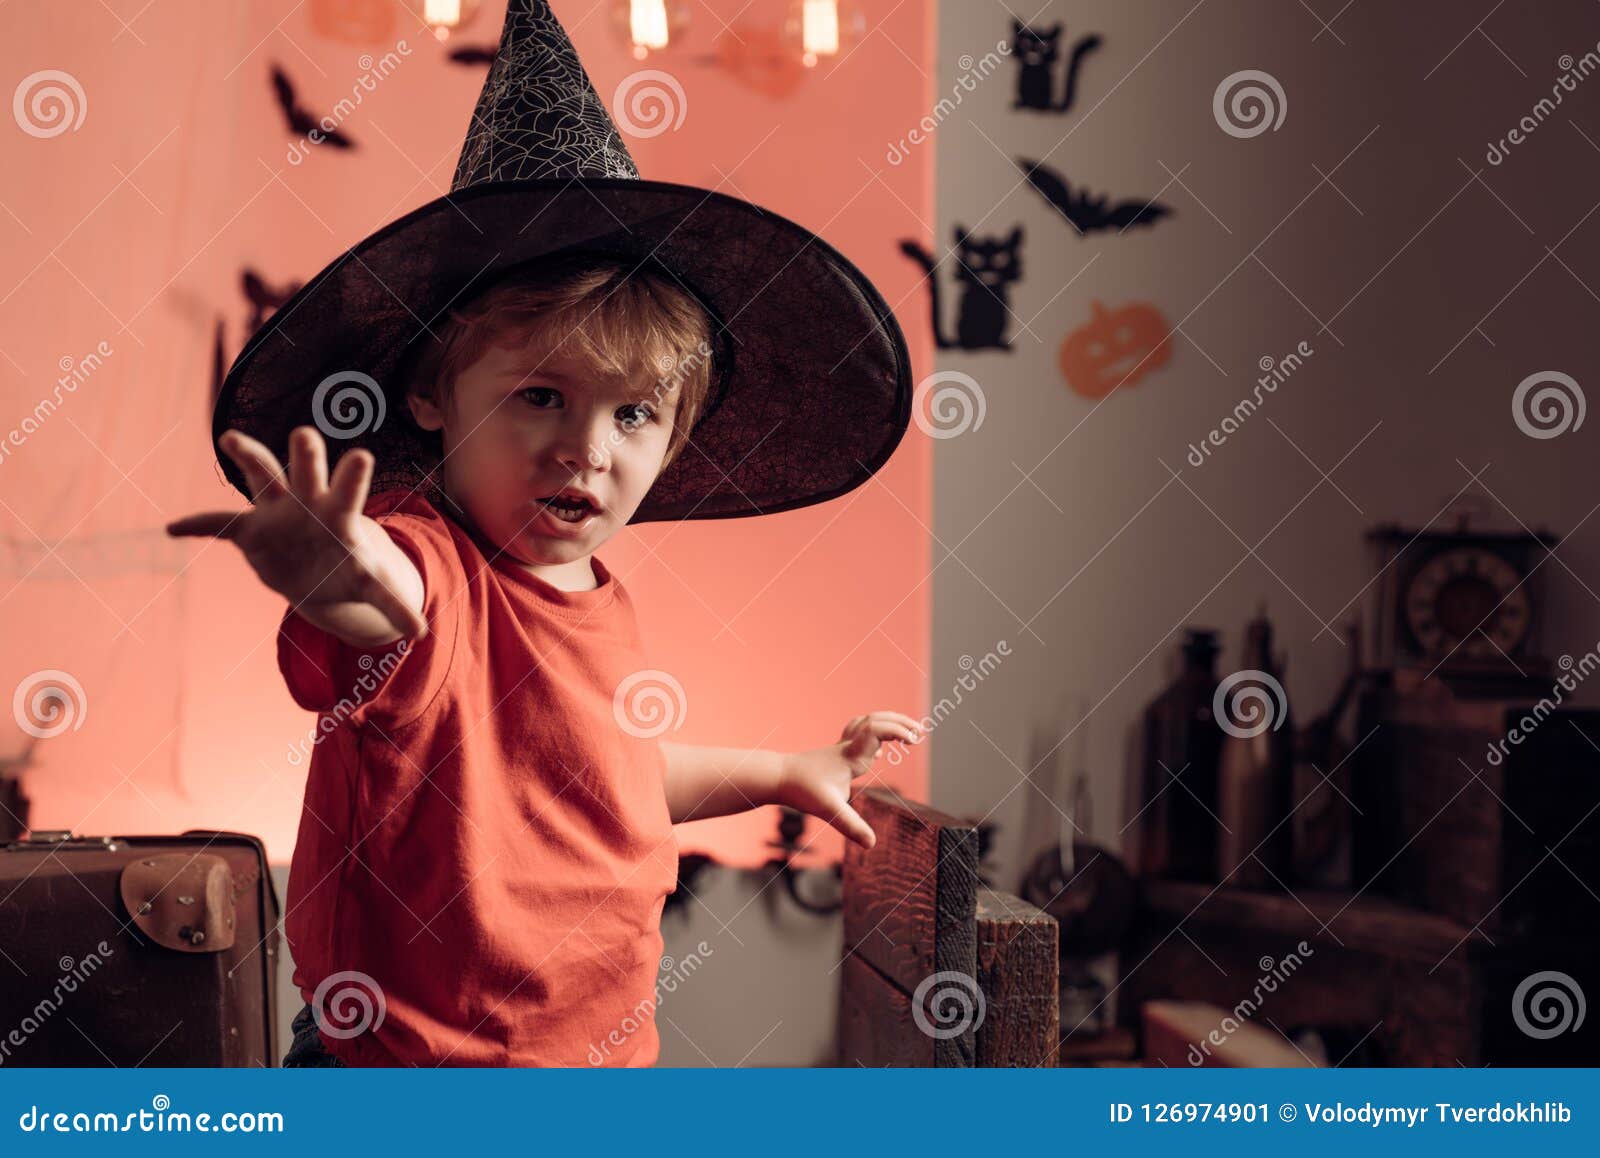 Halloween Child Decoration and Kids Scary Concept. Halloween Background ...